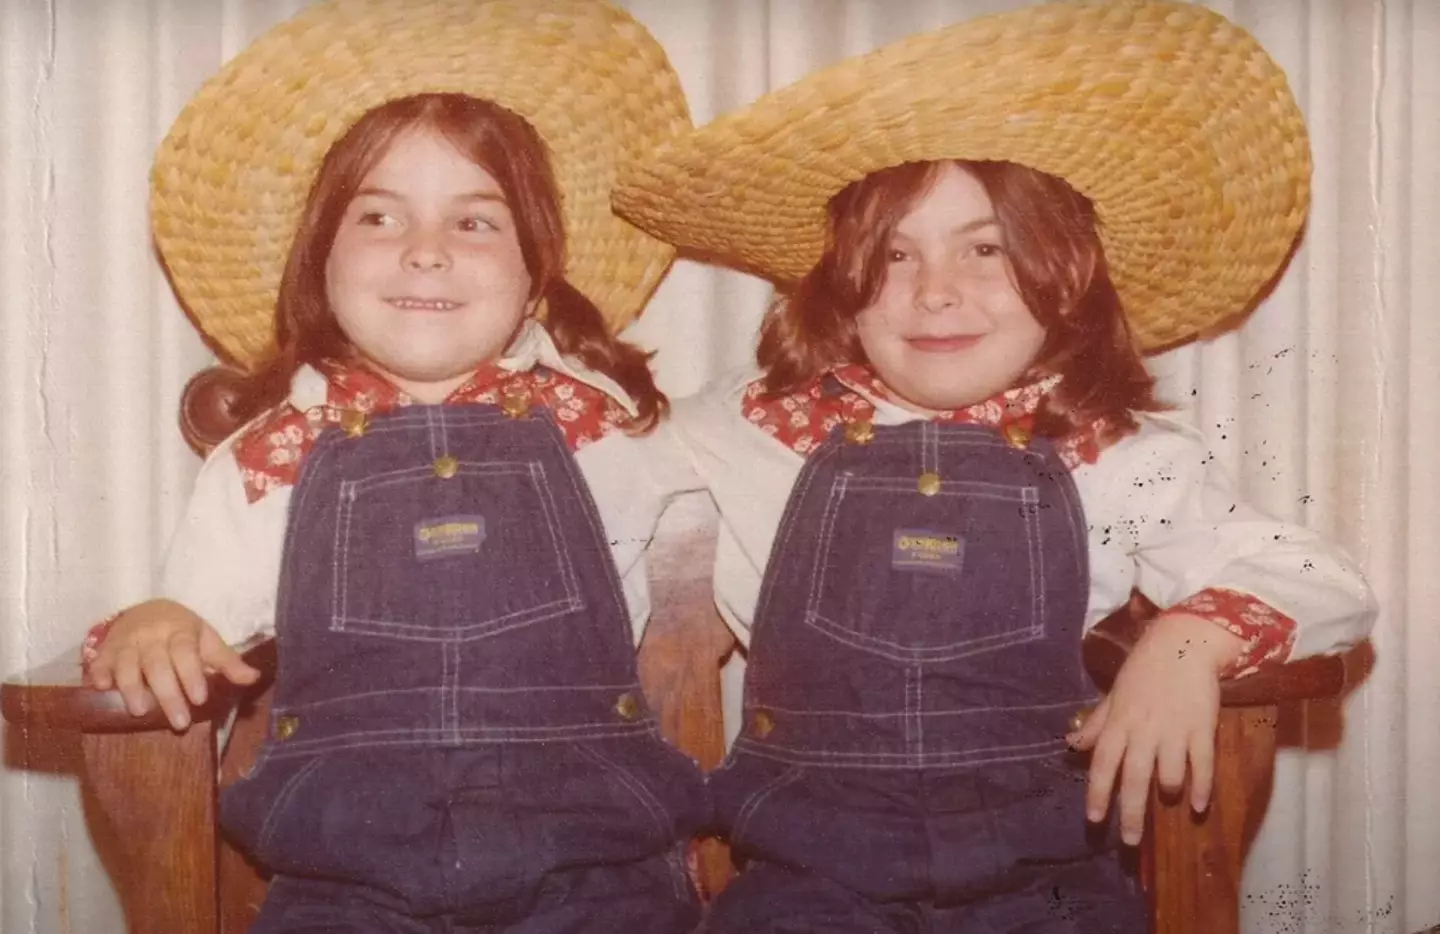 The twin girls' murders went unsolved for years. (A+E Networks)